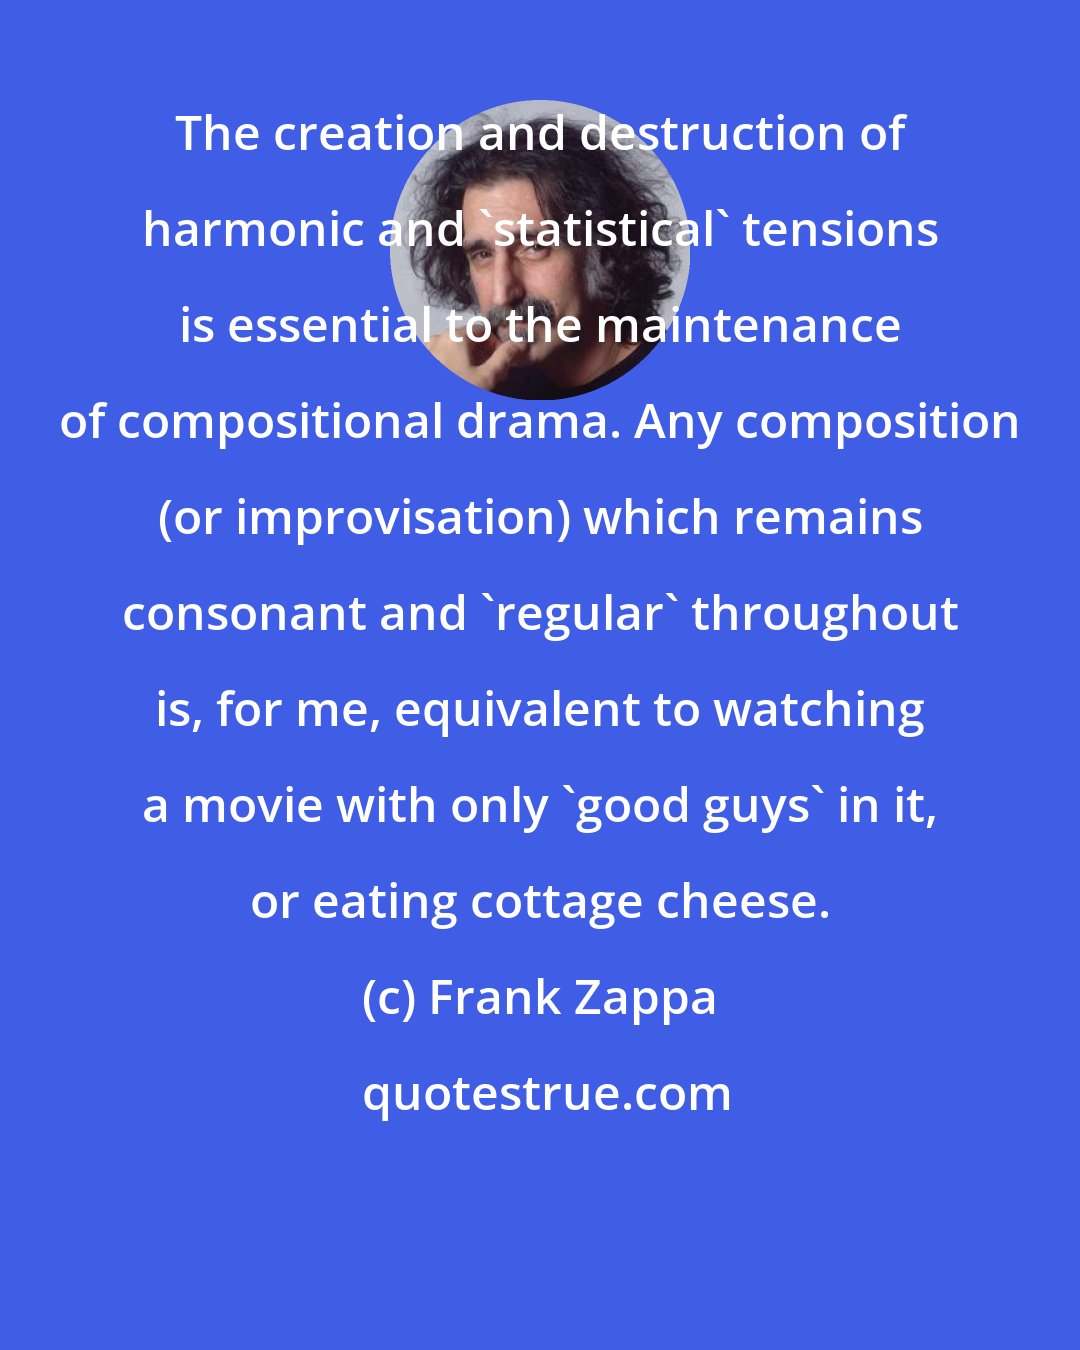 Frank Zappa: The creation and destruction of harmonic and 'statistical' tensions is essential to the maintenance of compositional drama. Any composition (or improvisation) which remains consonant and 'regular' throughout is, for me, equivalent to watching a movie with only 'good guys' in it, or eating cottage cheese.